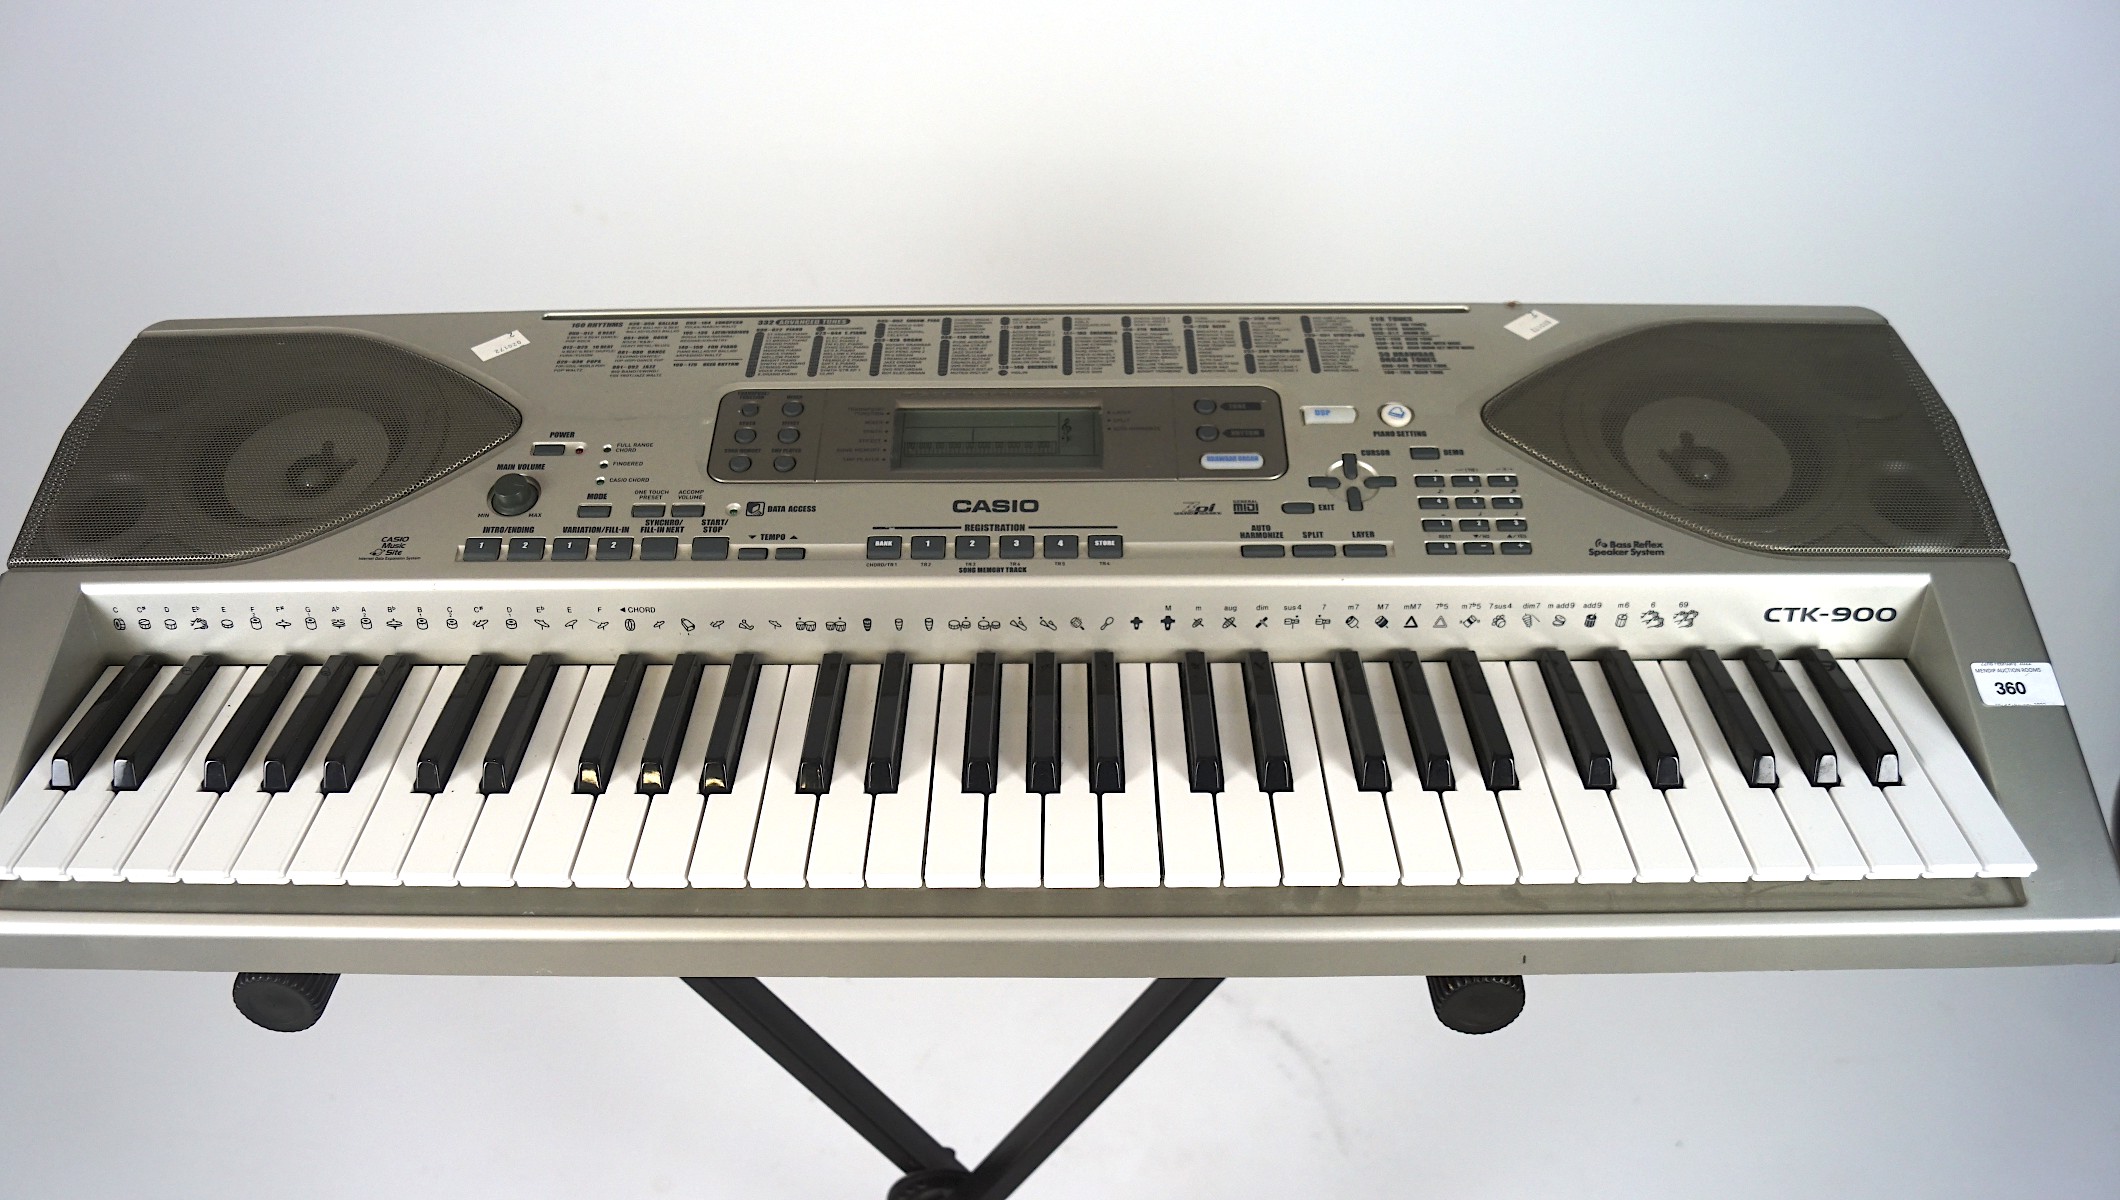 A Casio CTK-900 keyboard with matching stand, - Image 2 of 2